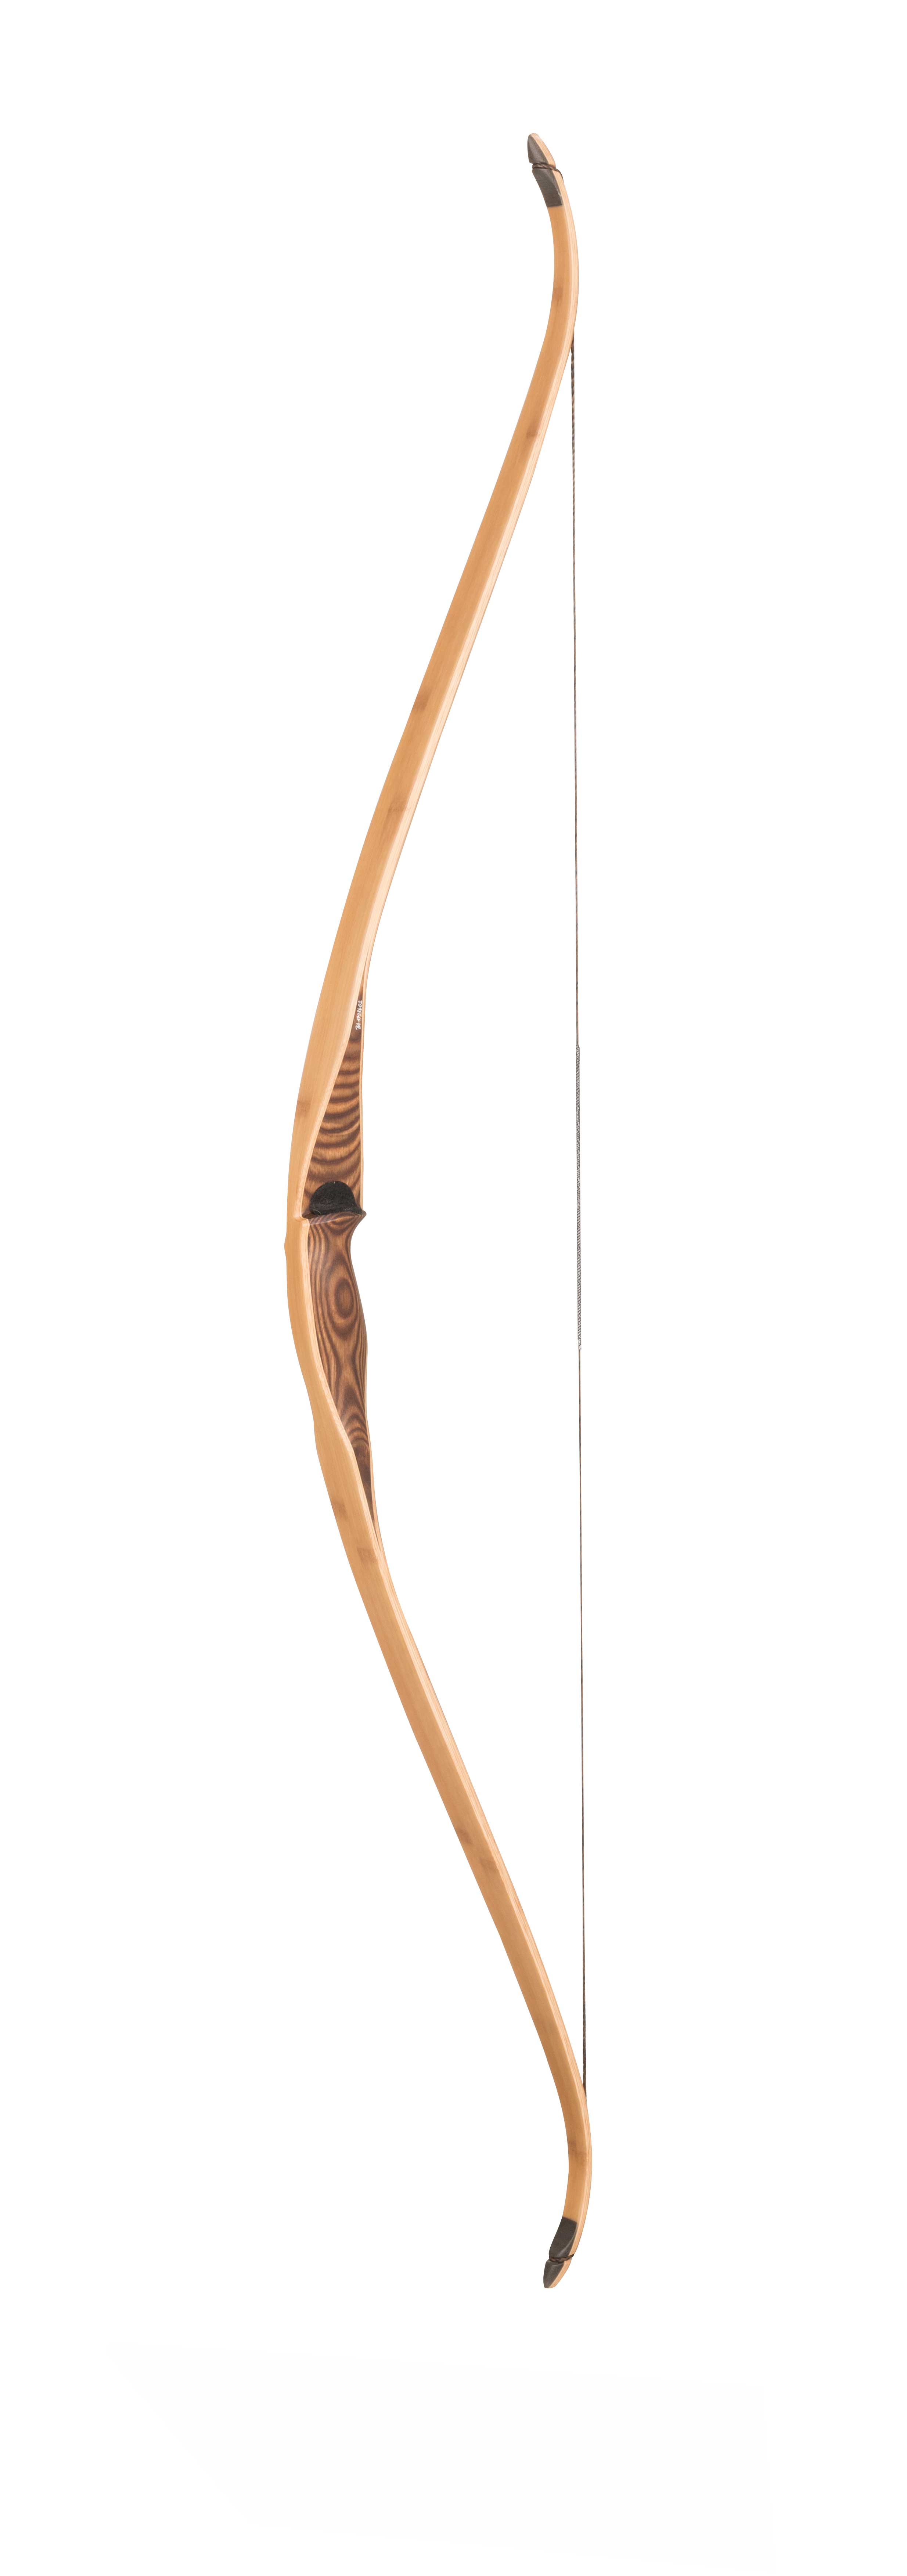 Recurve Bows Traditional Bows Bows 3rivers Archery